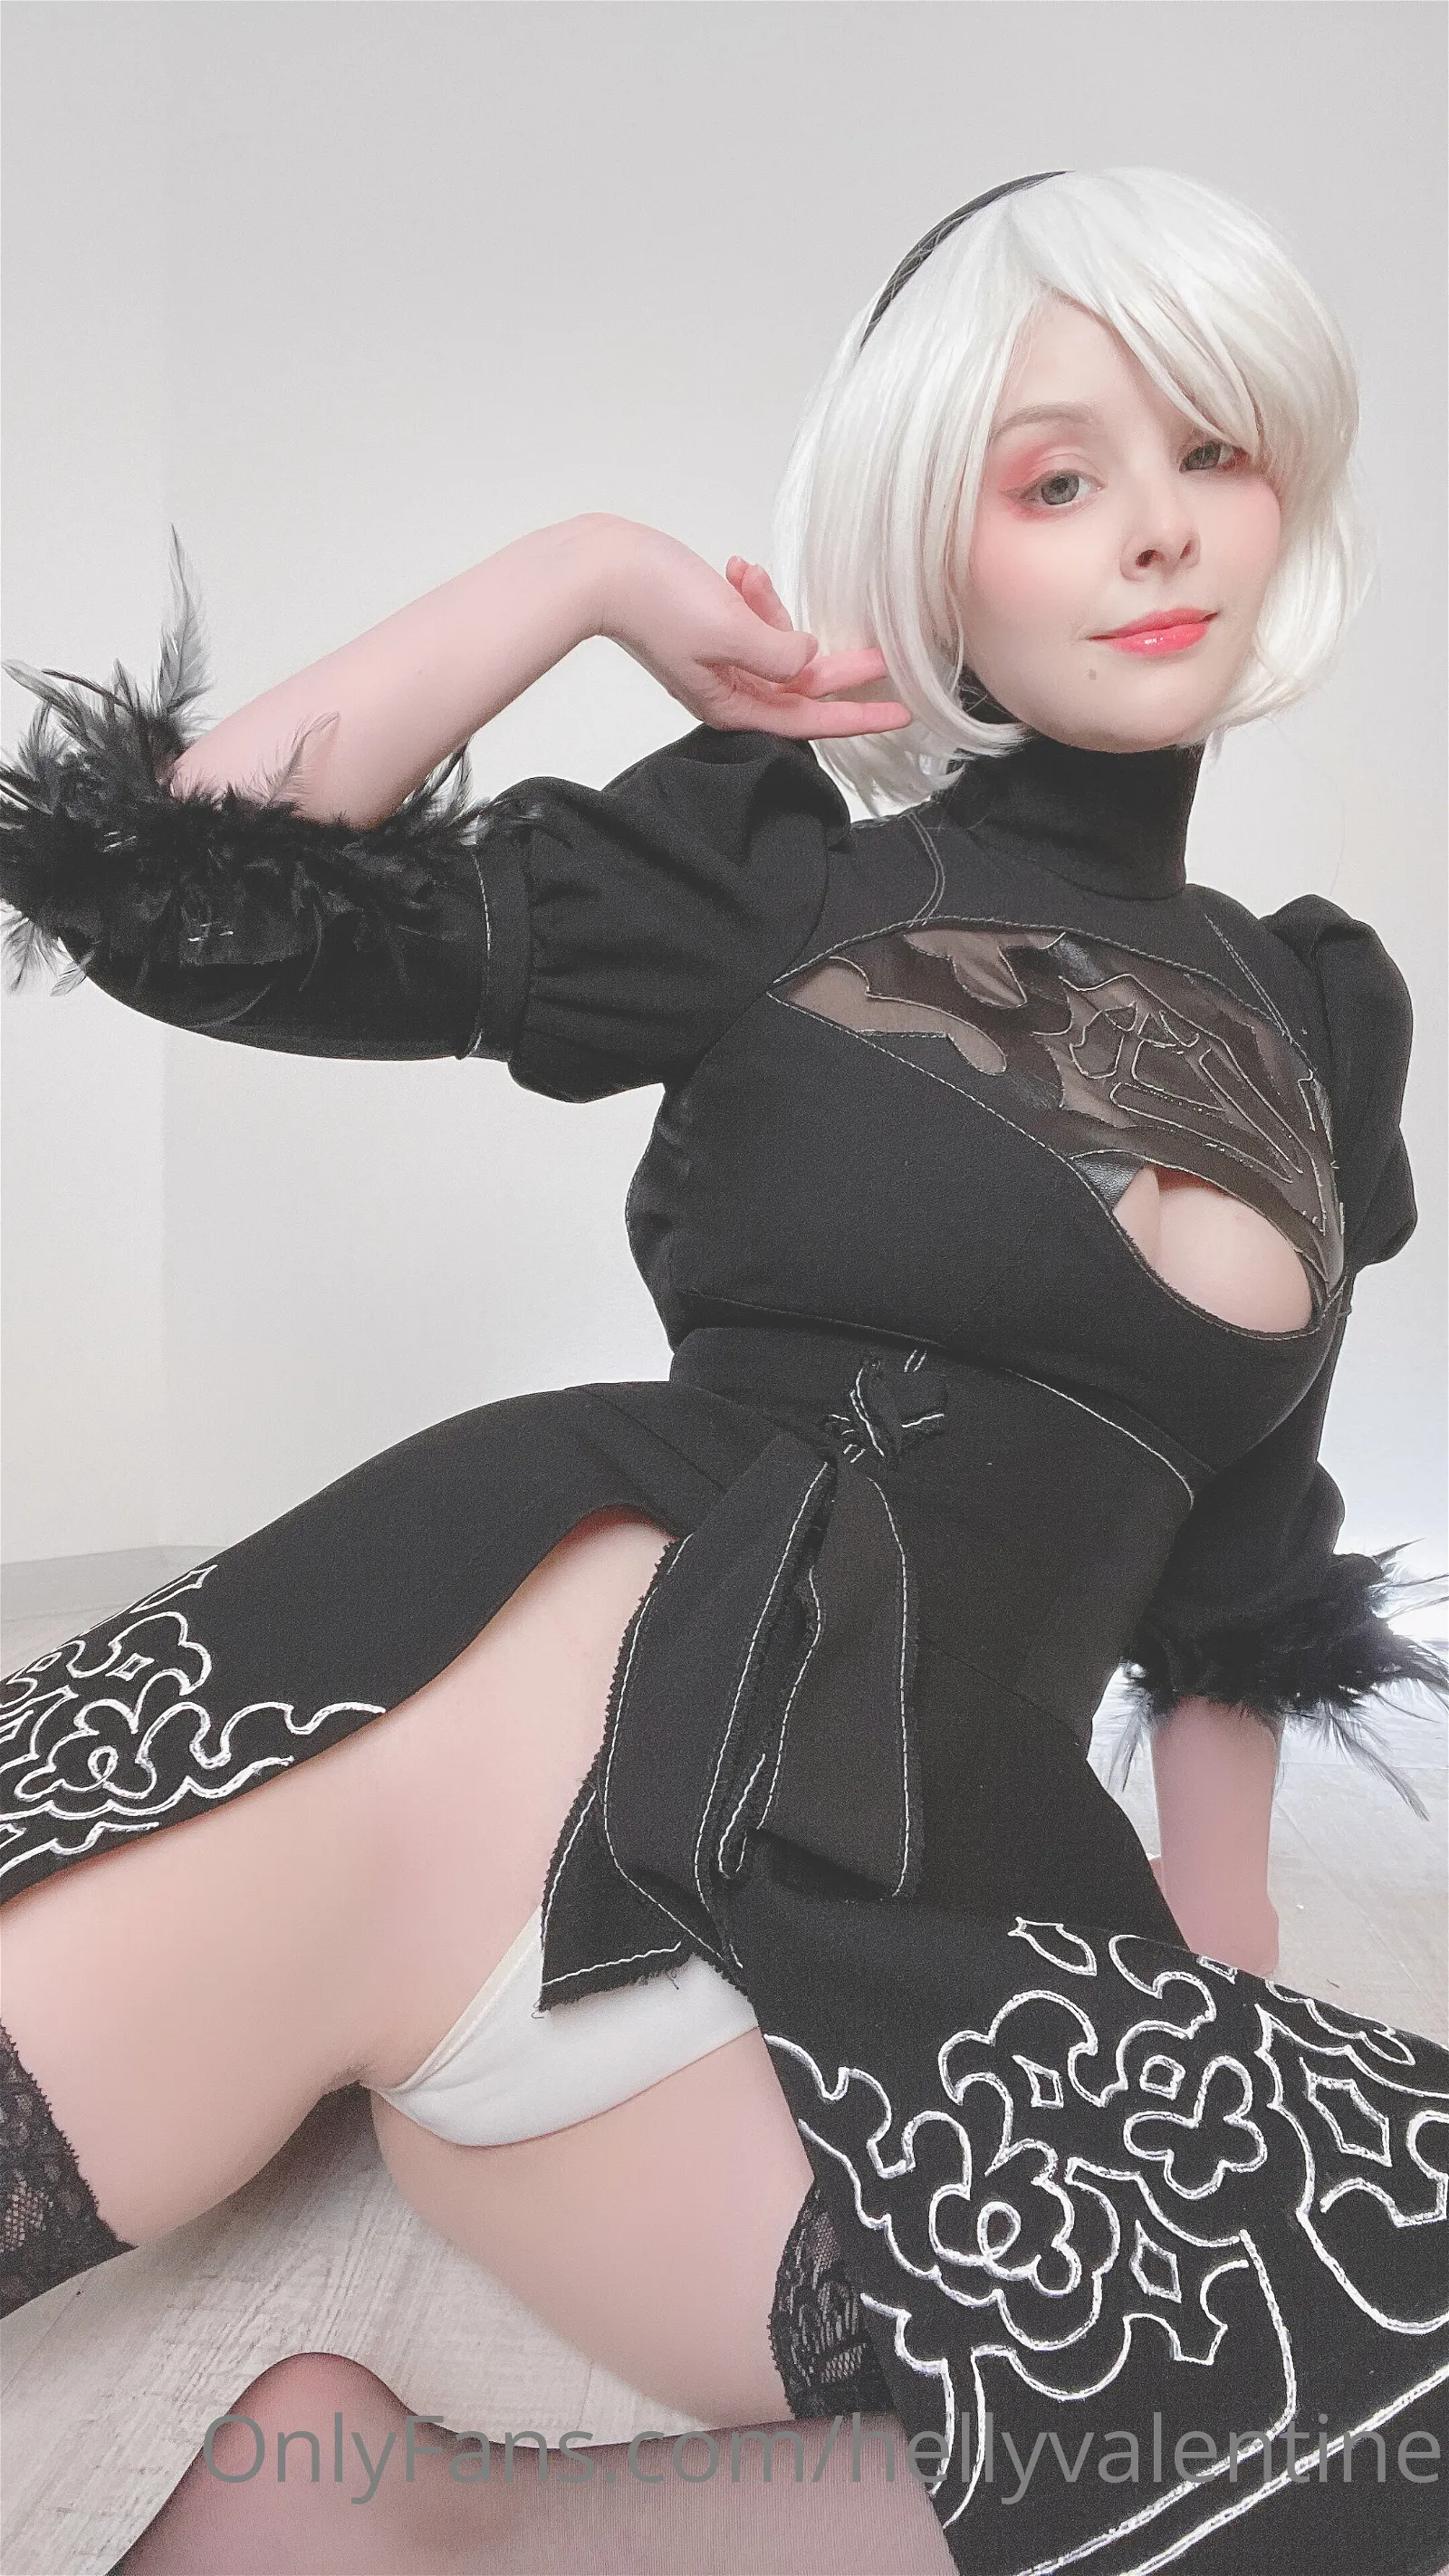 Hình Cosplay Chapter 352 - Helly Valentine - Trang 2